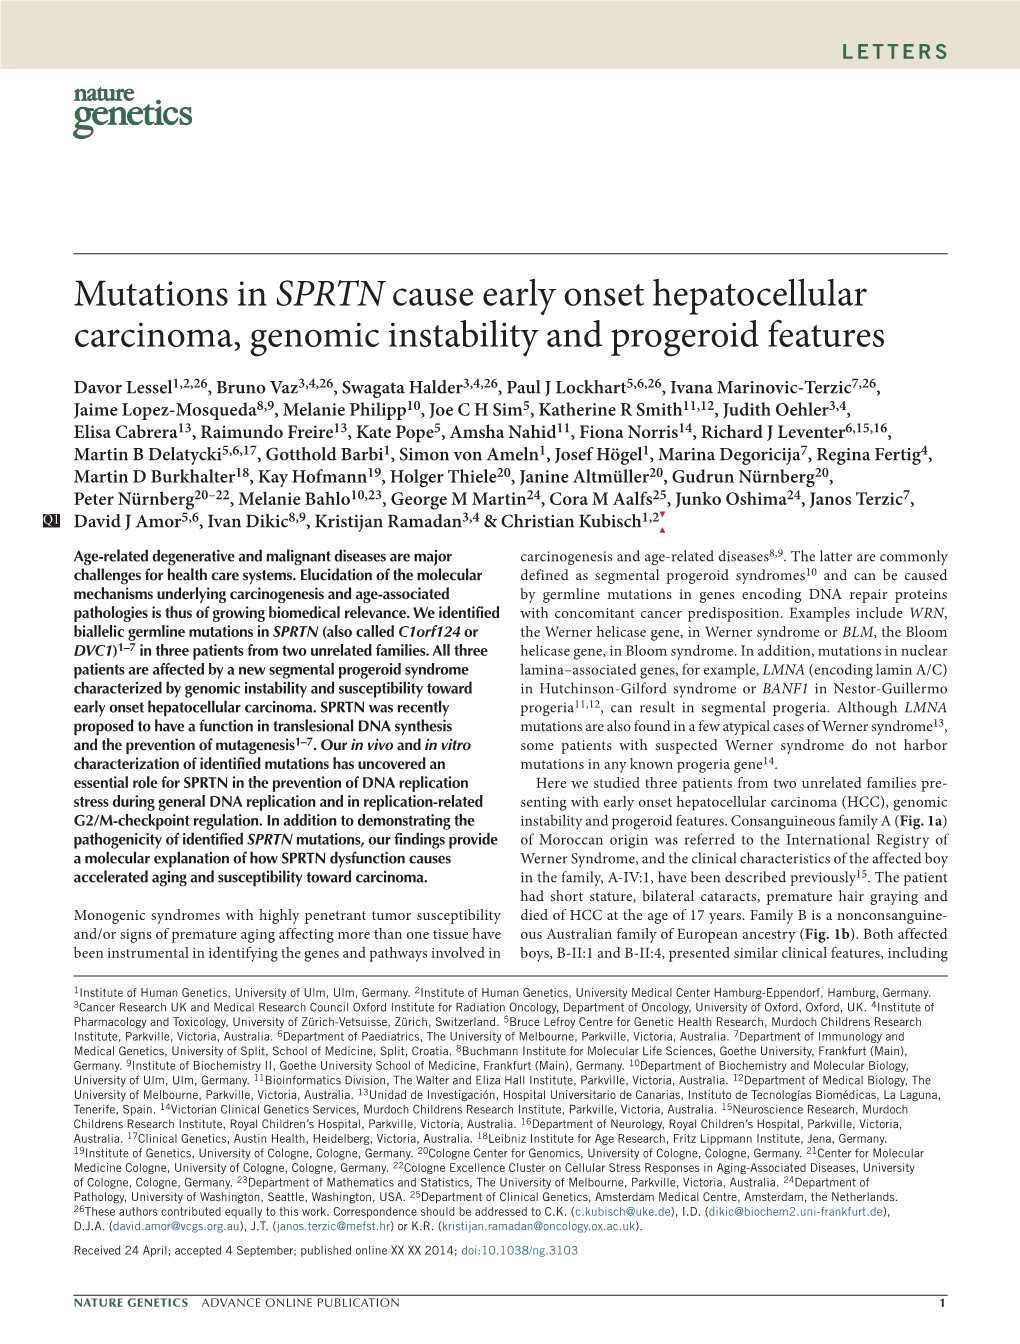 Mutations in SPRTN Cause Early Onset Hepatocellular Carcinoma, Genomic Instability and Progeroid Features